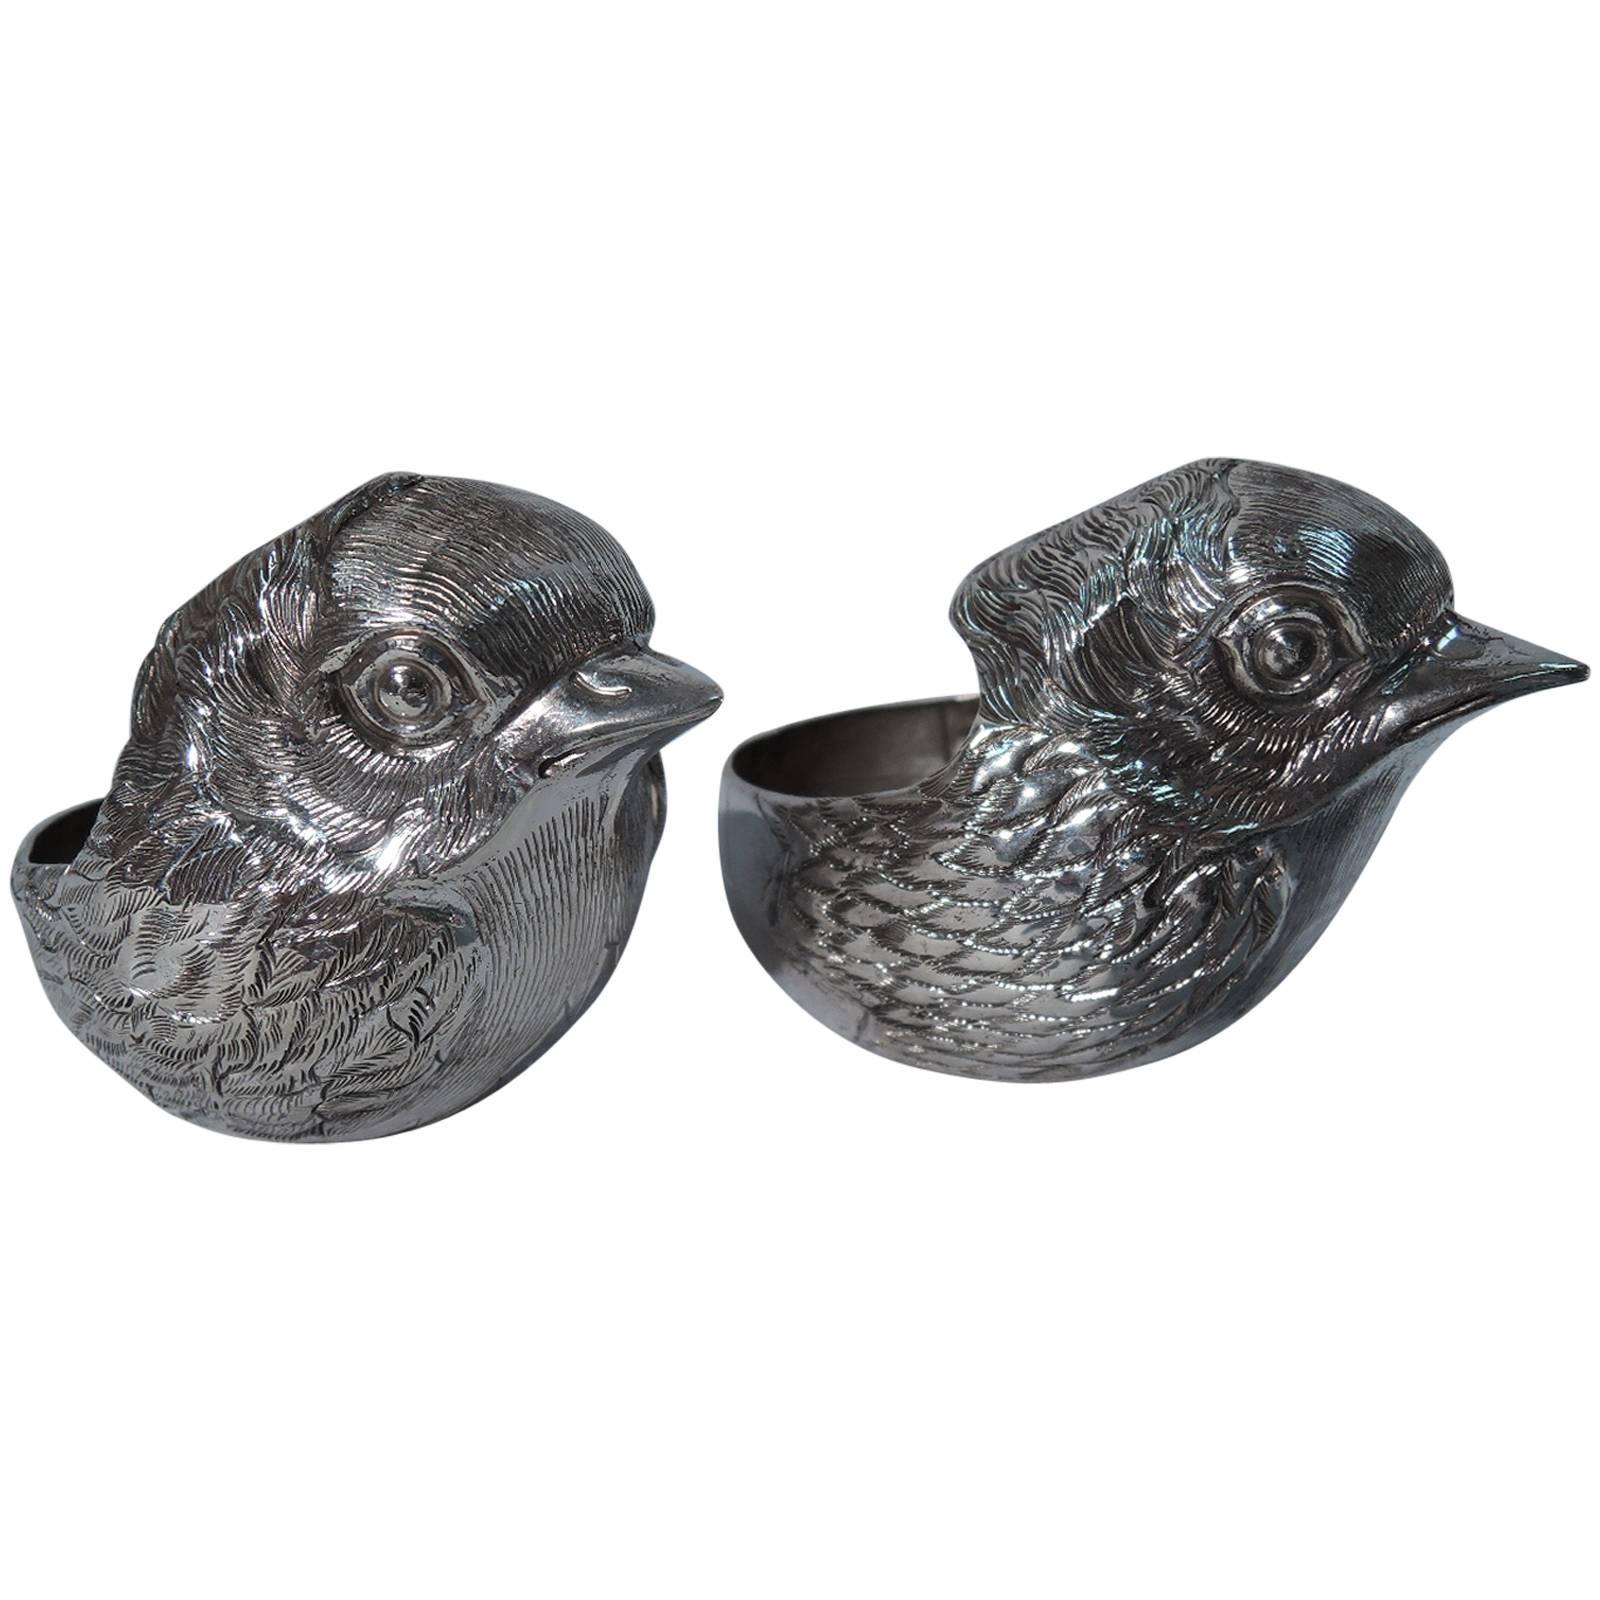 Antique Sterling Silver Open Salts in Form of Adorable Sweet Baby Chicks